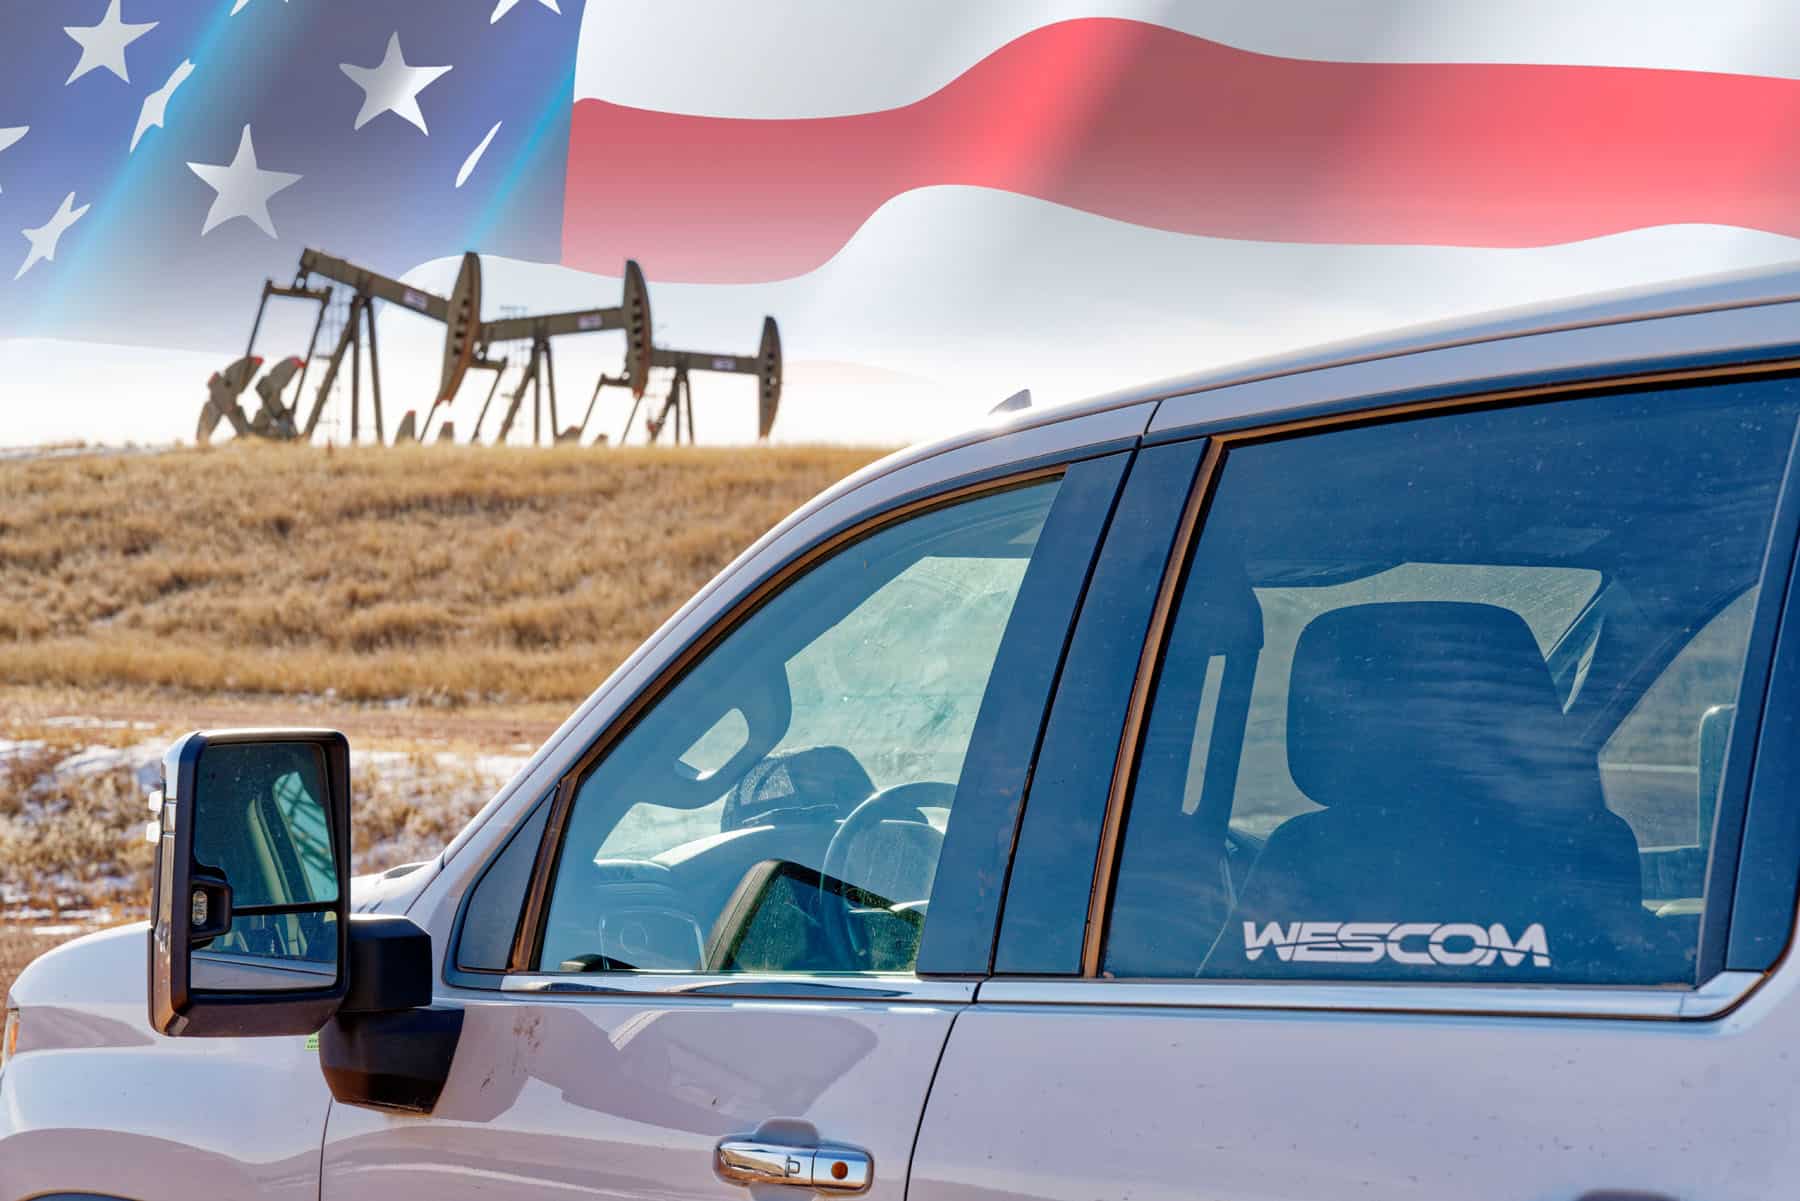 Wescom truck parked in front of oil drills with an American flag in the background